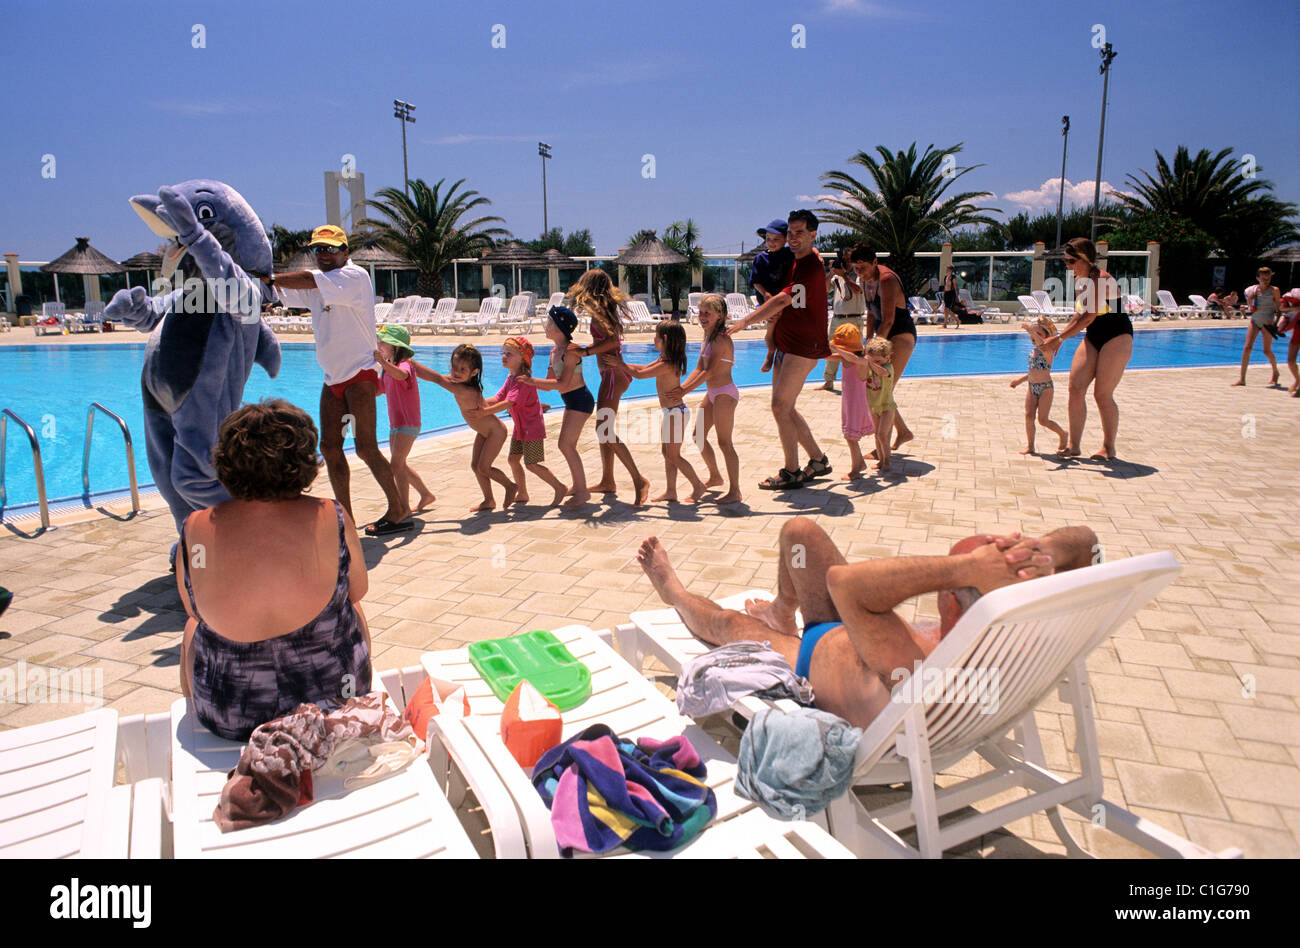 France, Pyrenees Orientales, Canet plage, brazilia camping Stock Photo